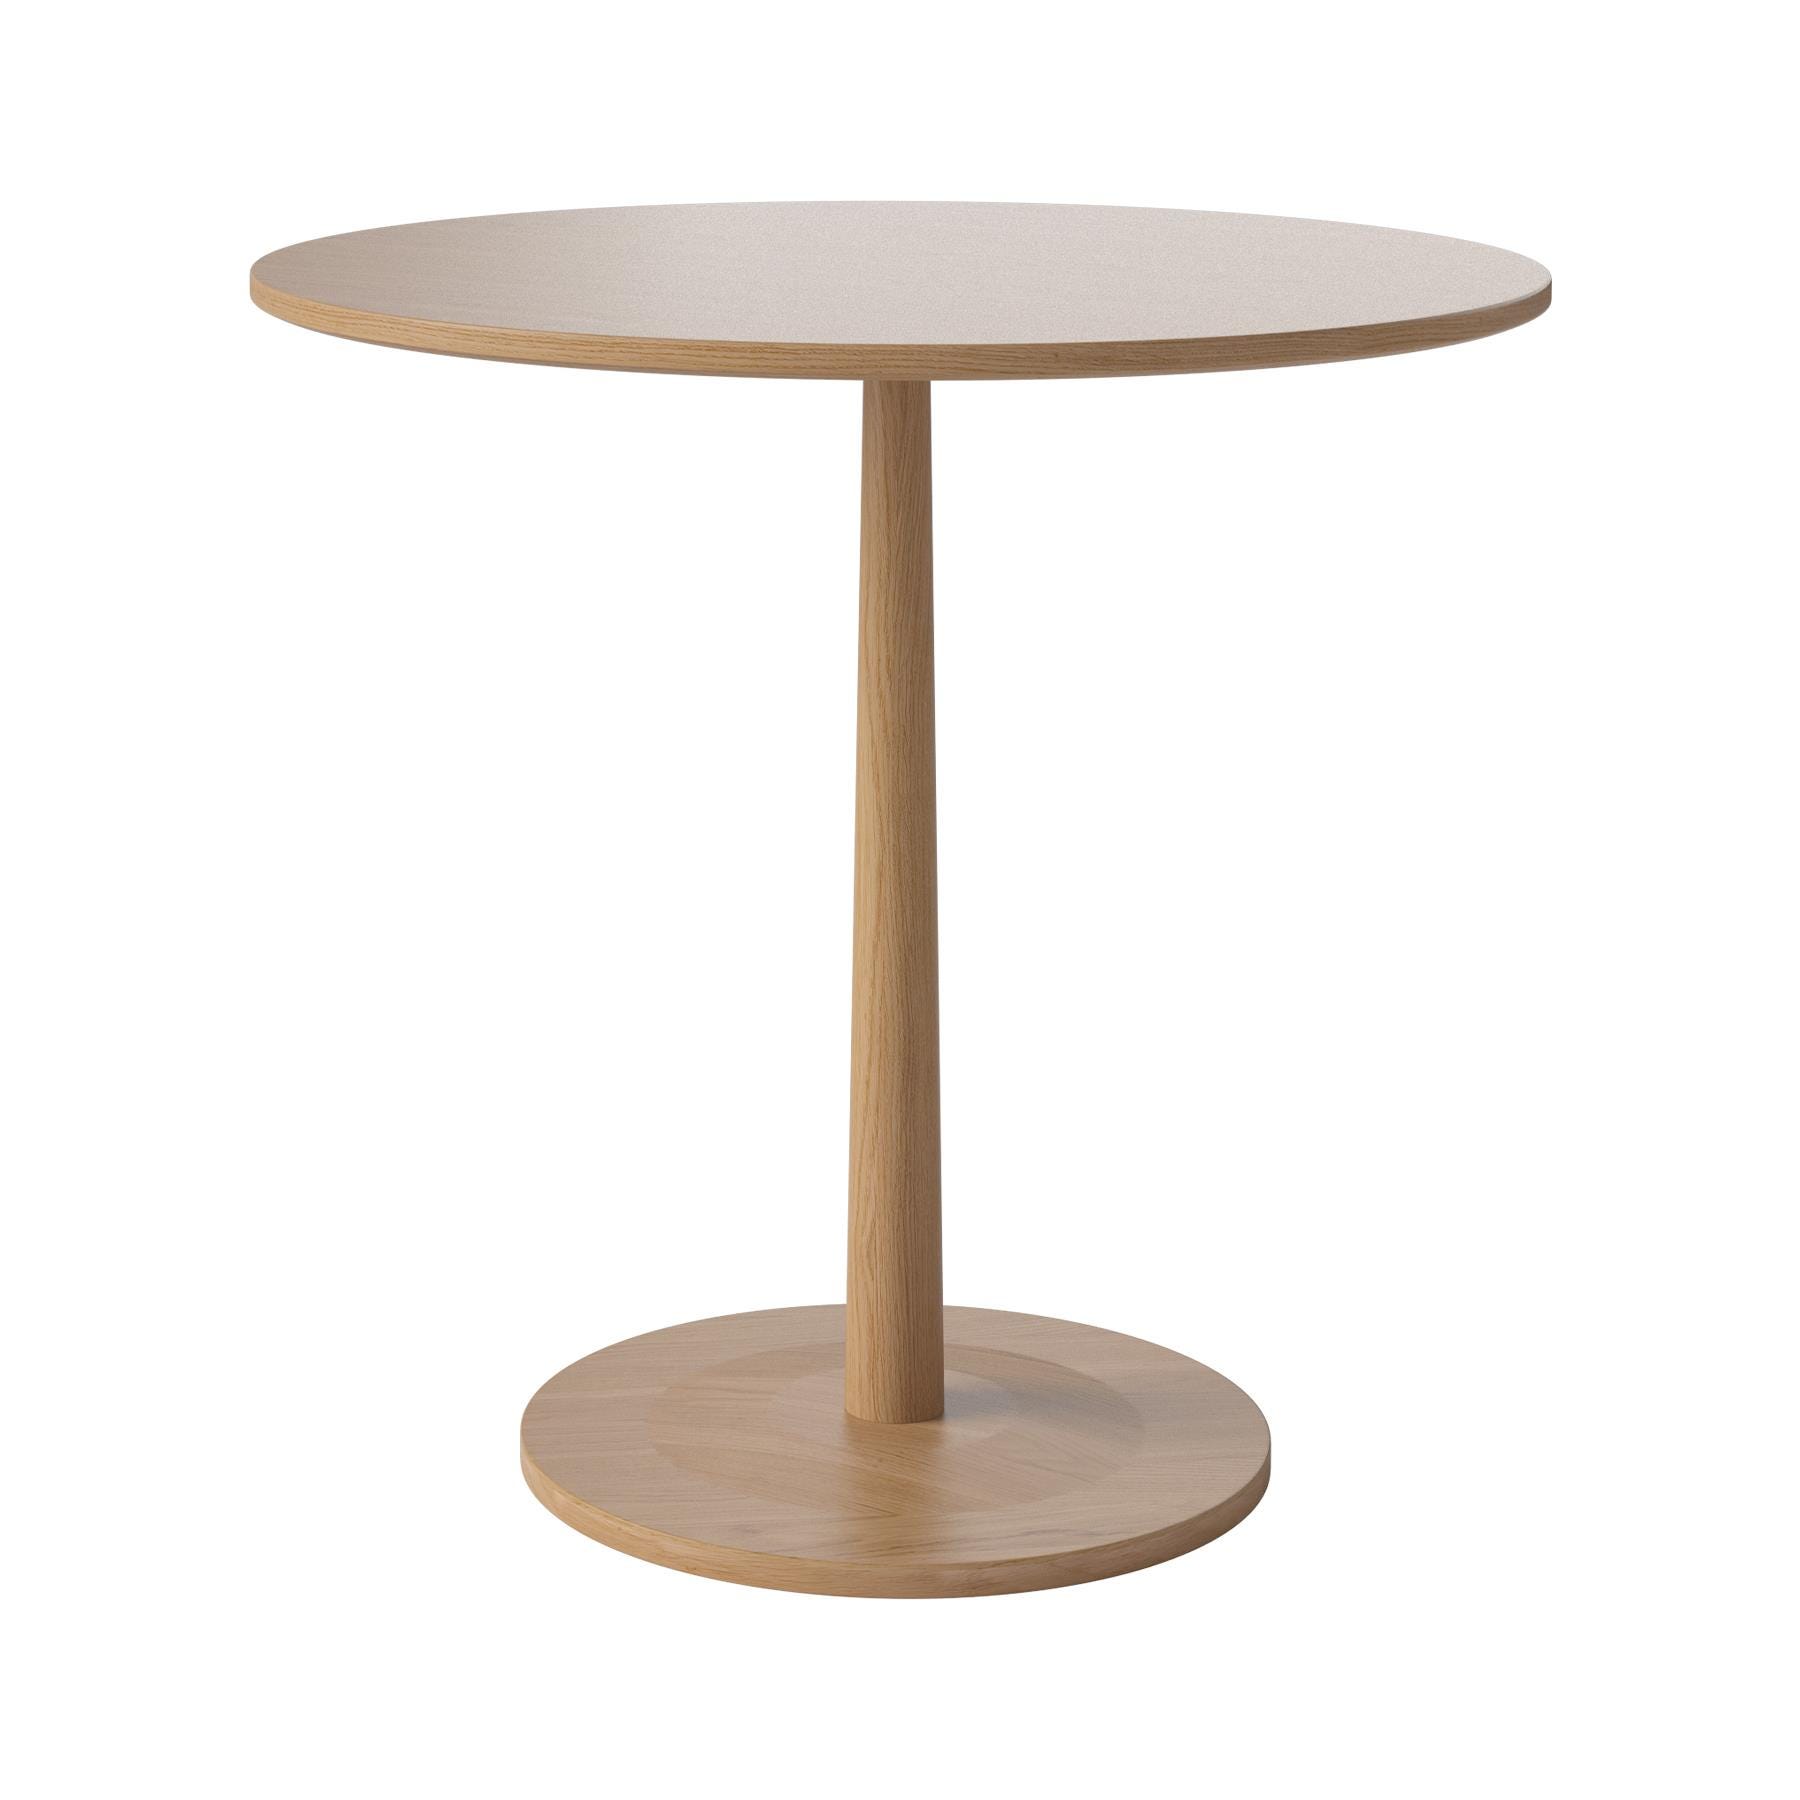 Bolia Turned Dining Table Round Lacquered Oak Light Wood Designer Furniture From Holloways Of Ludlow